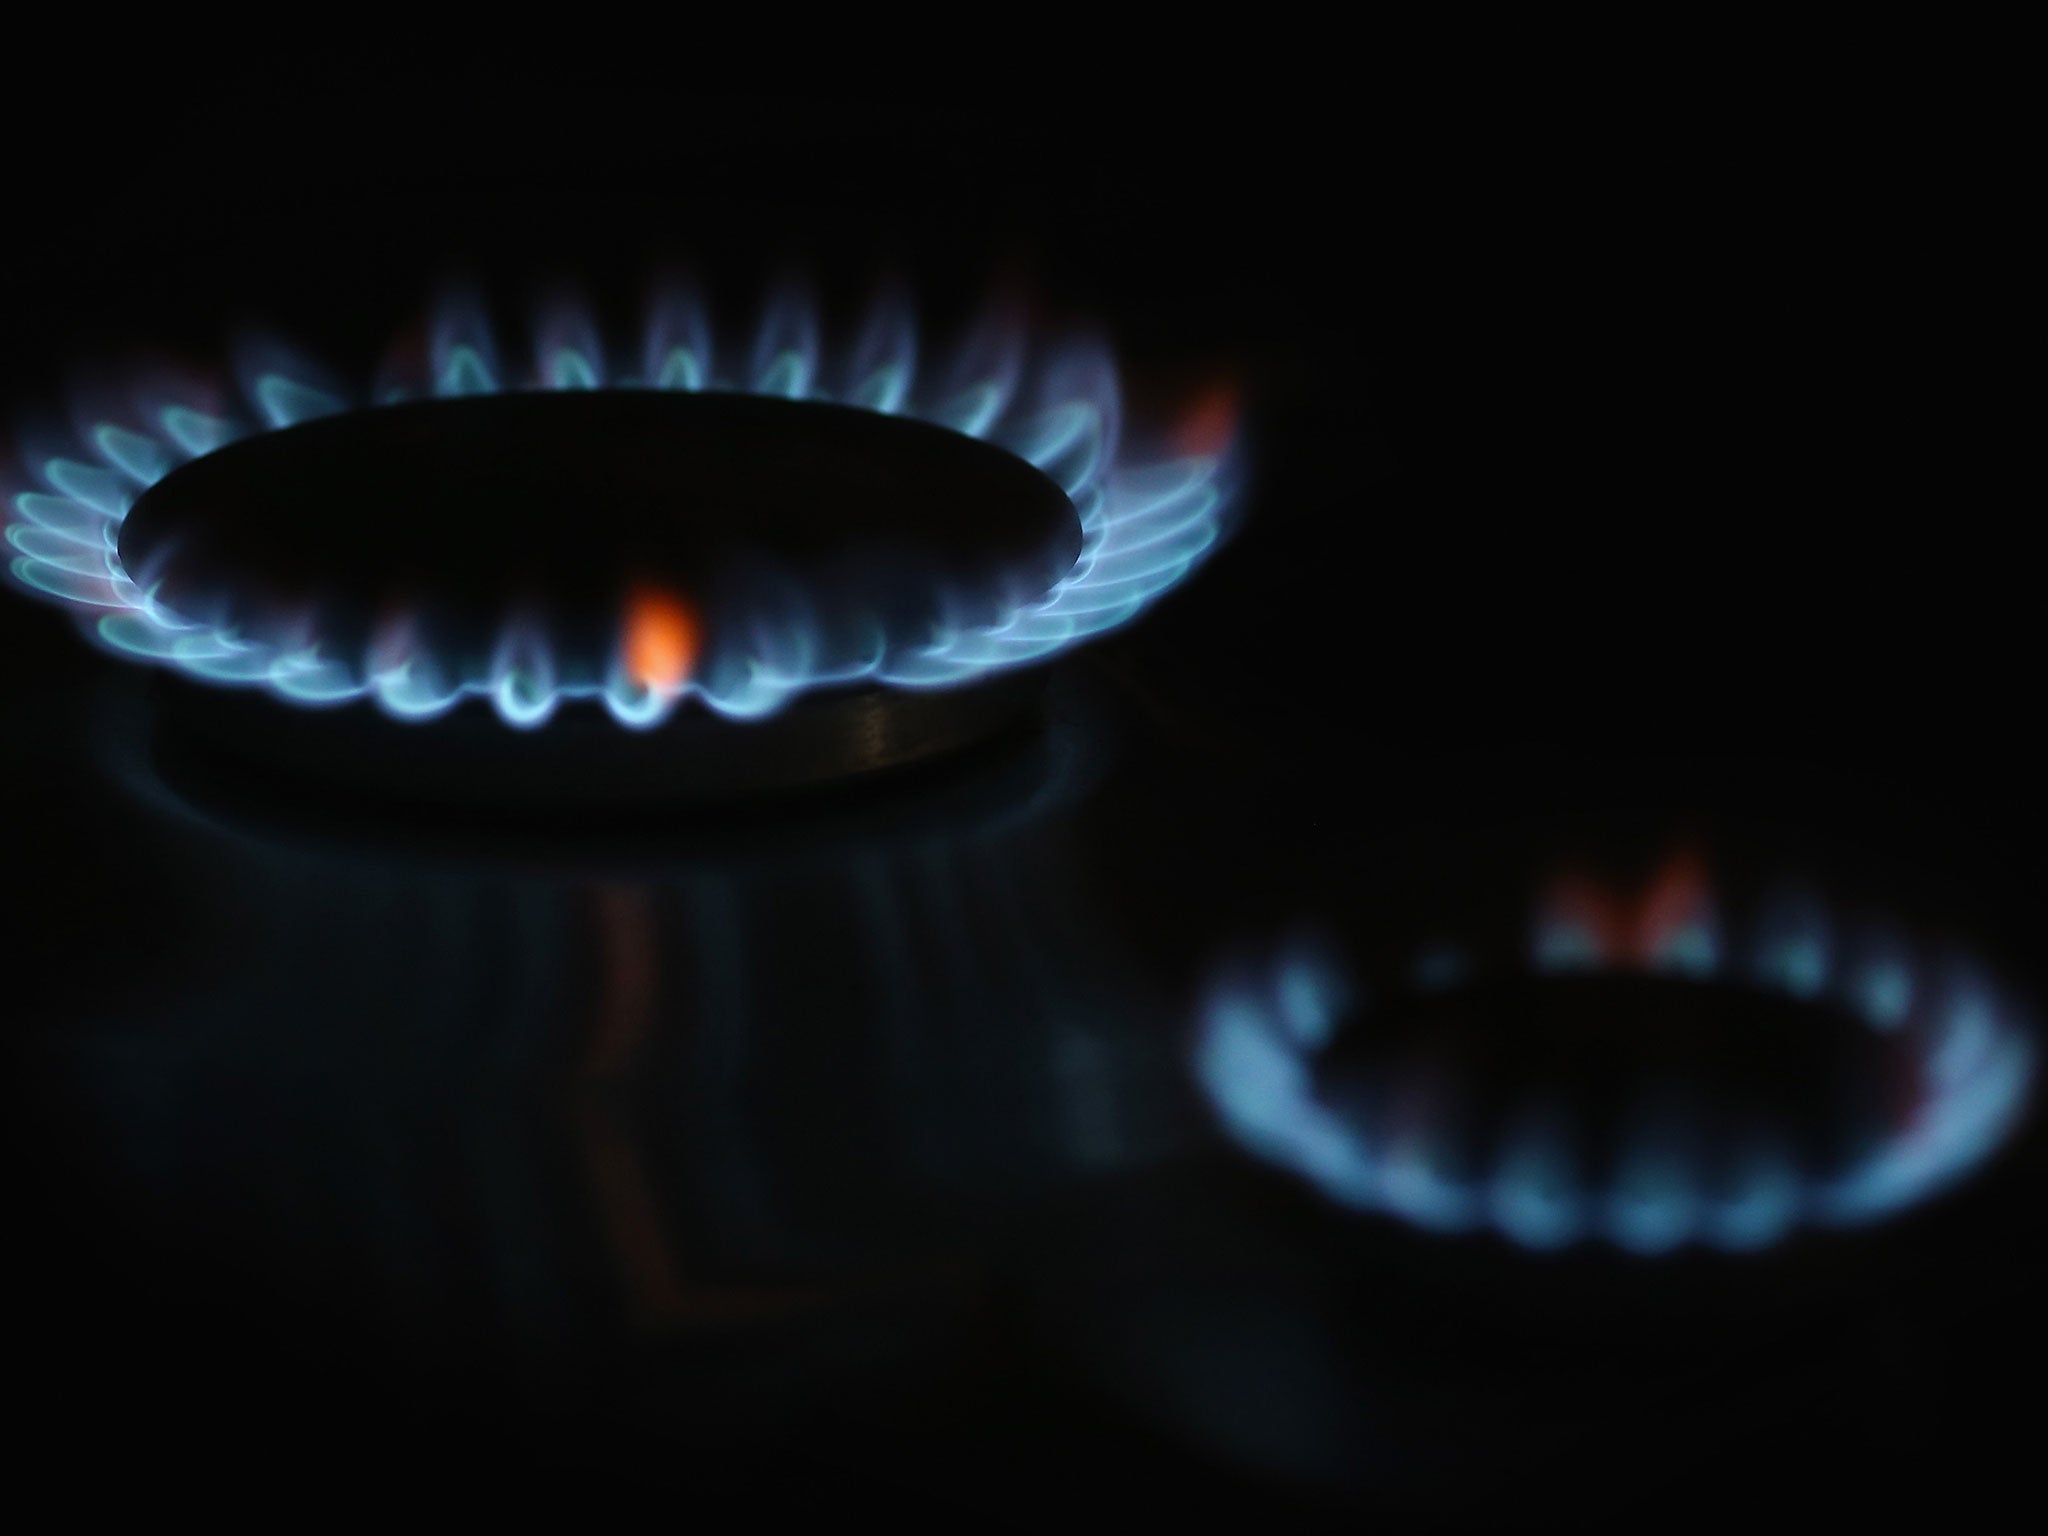 Price cuts were moved off the bank burner as npower reduced its gas tariff